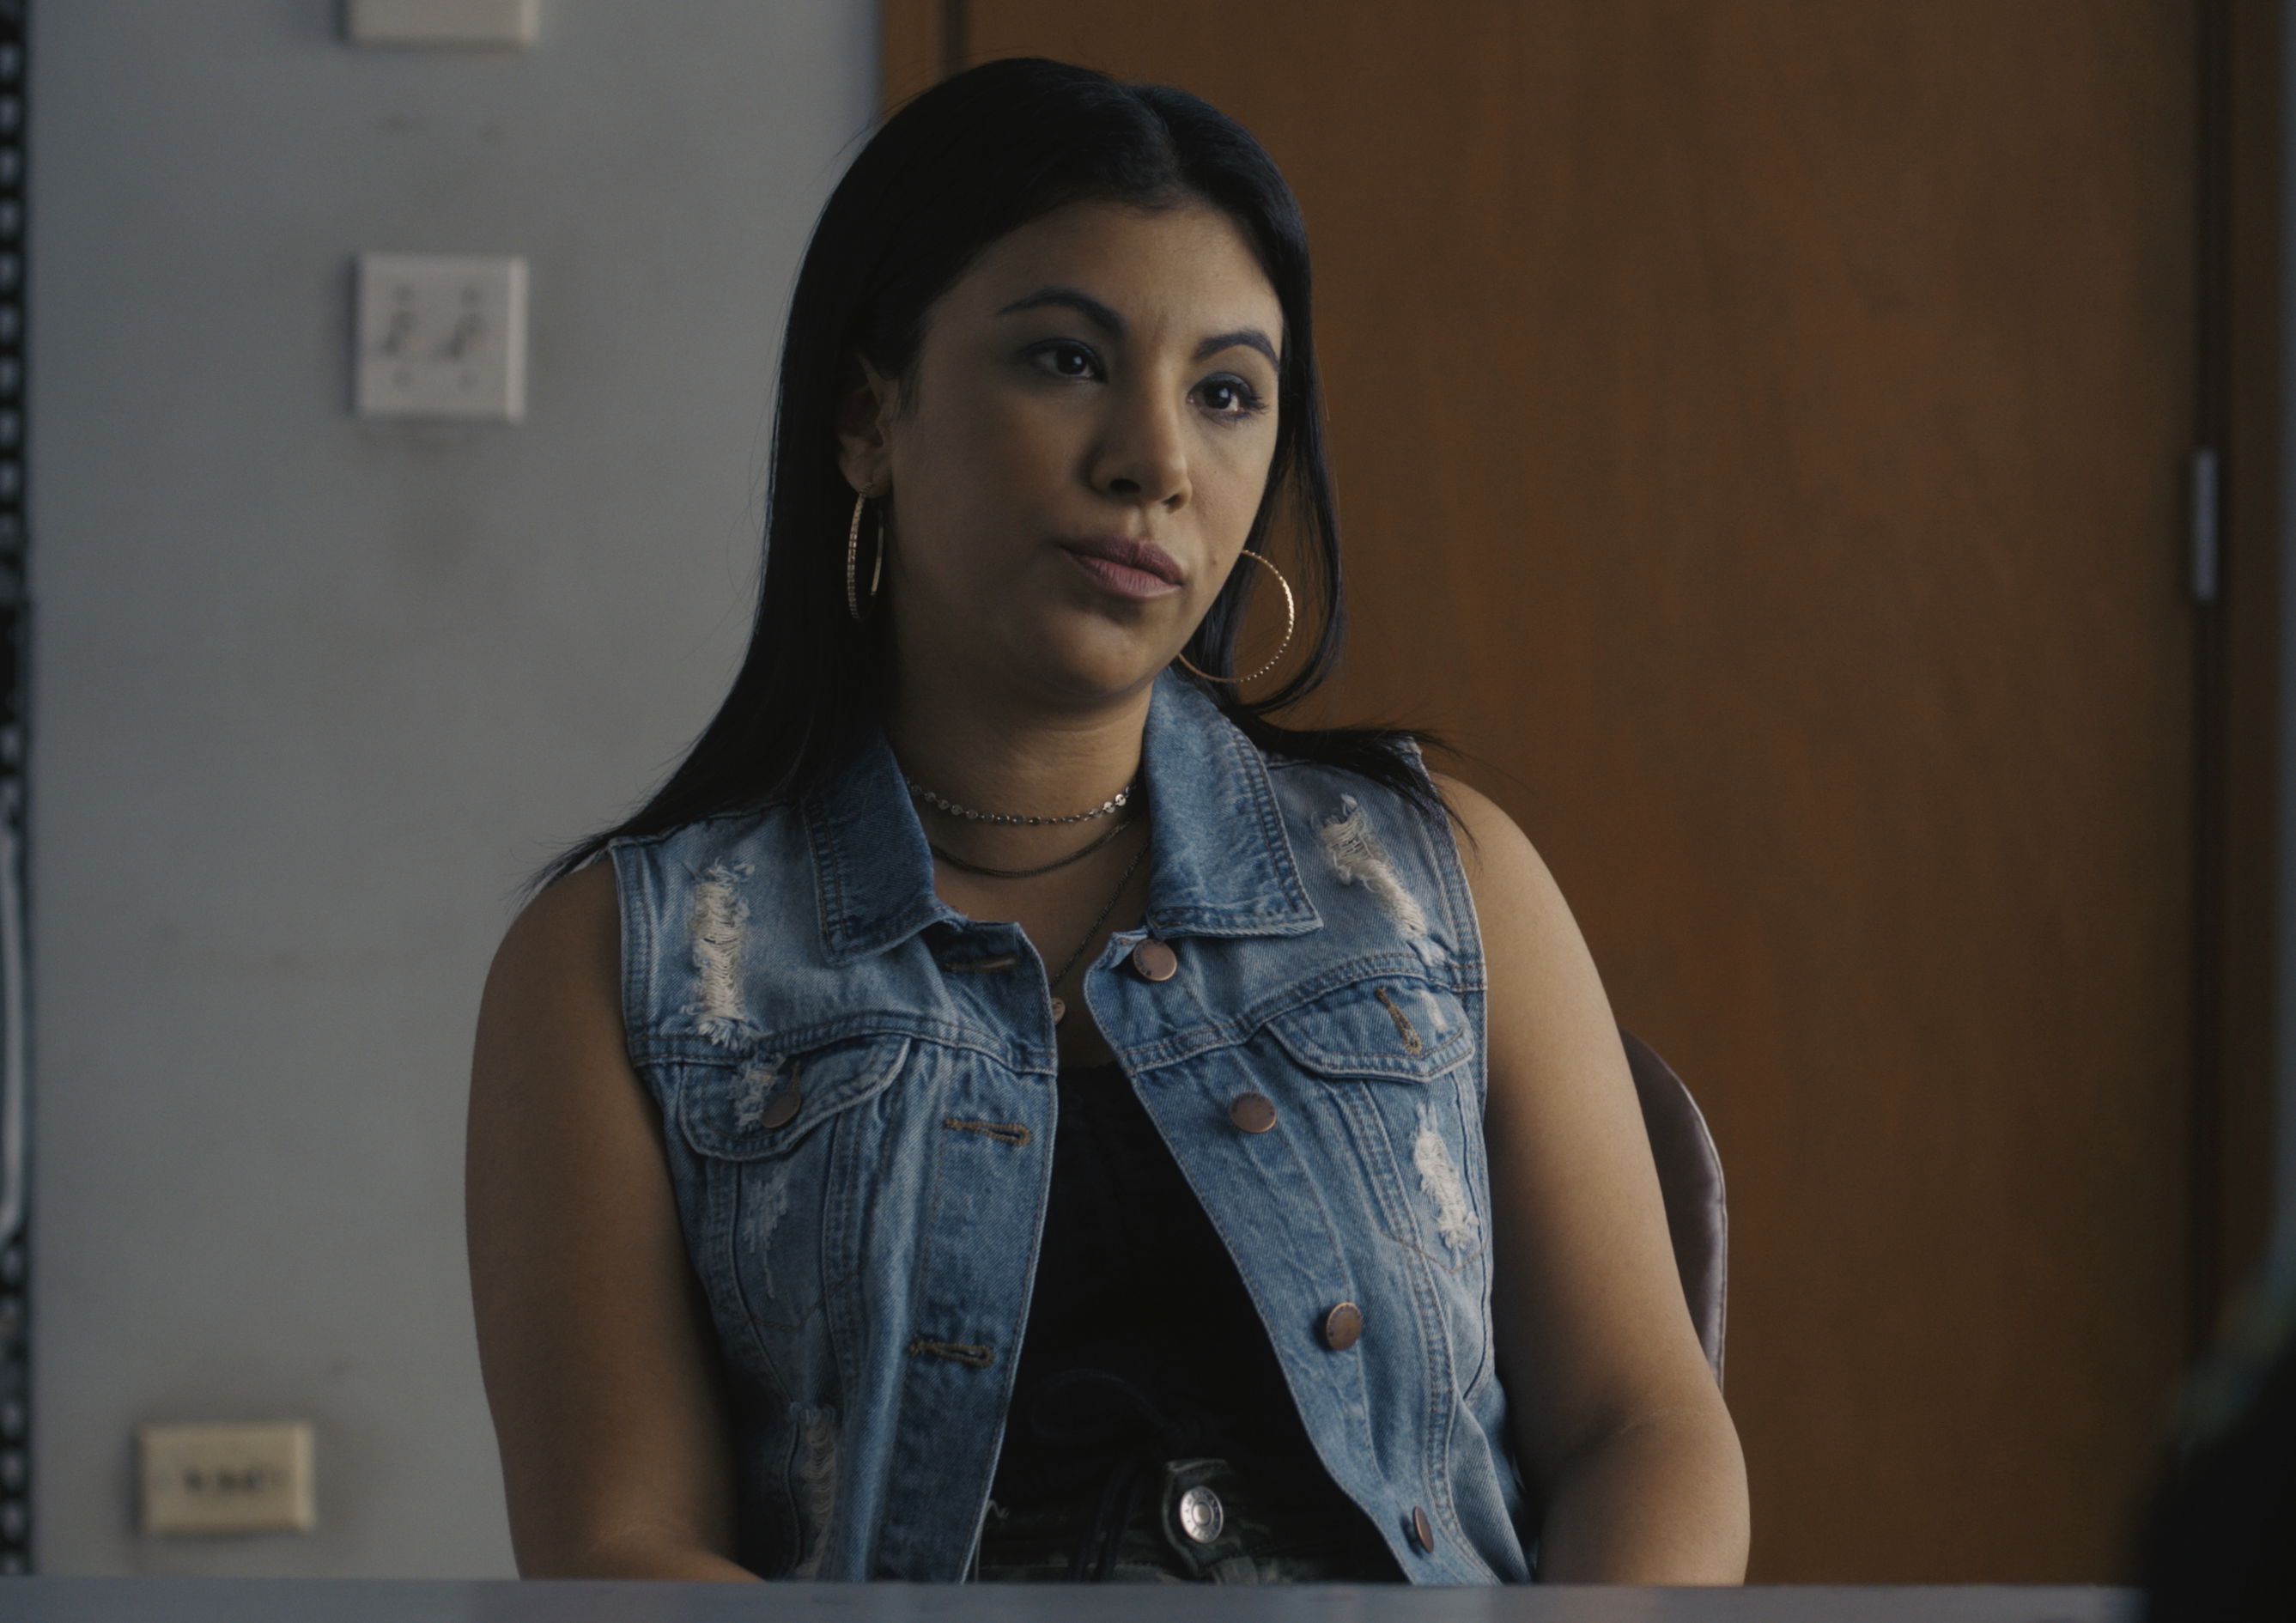 Chrissie Fit Talks About Playing A Mysterious Character In I Know What You Did Last Summer [Exclusive Interview]